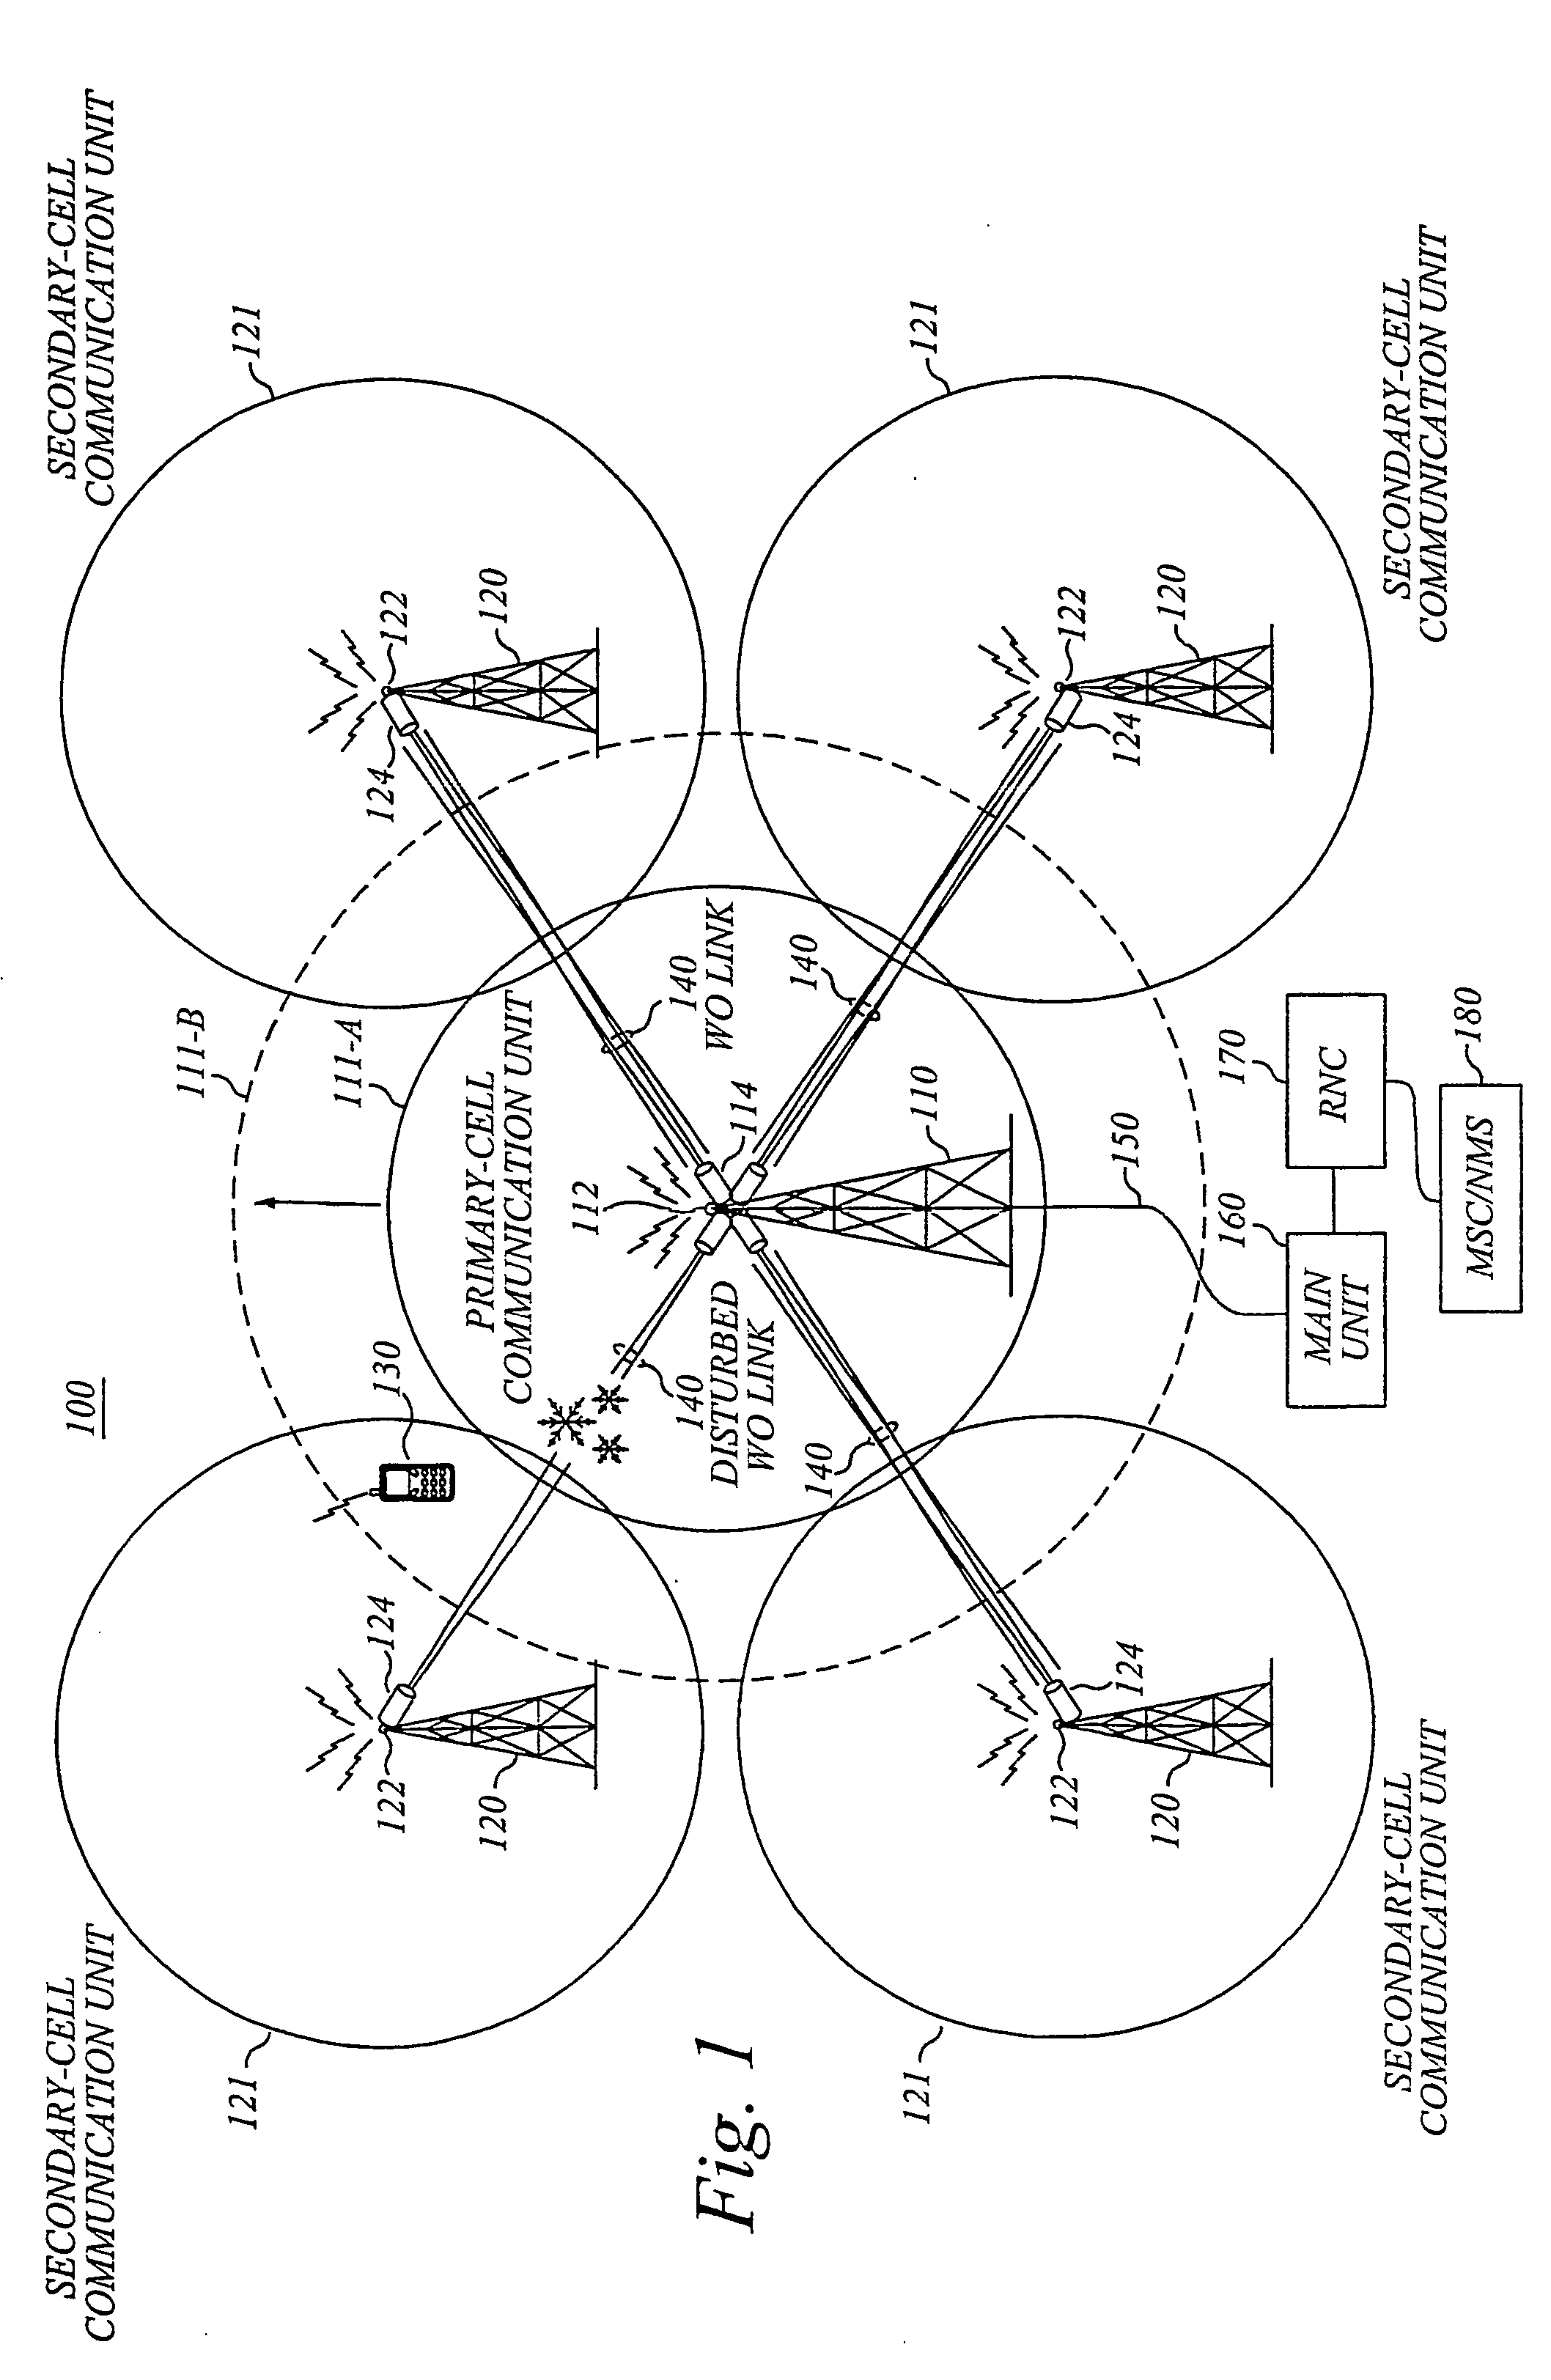 Cellular communications system employing wireless optical links